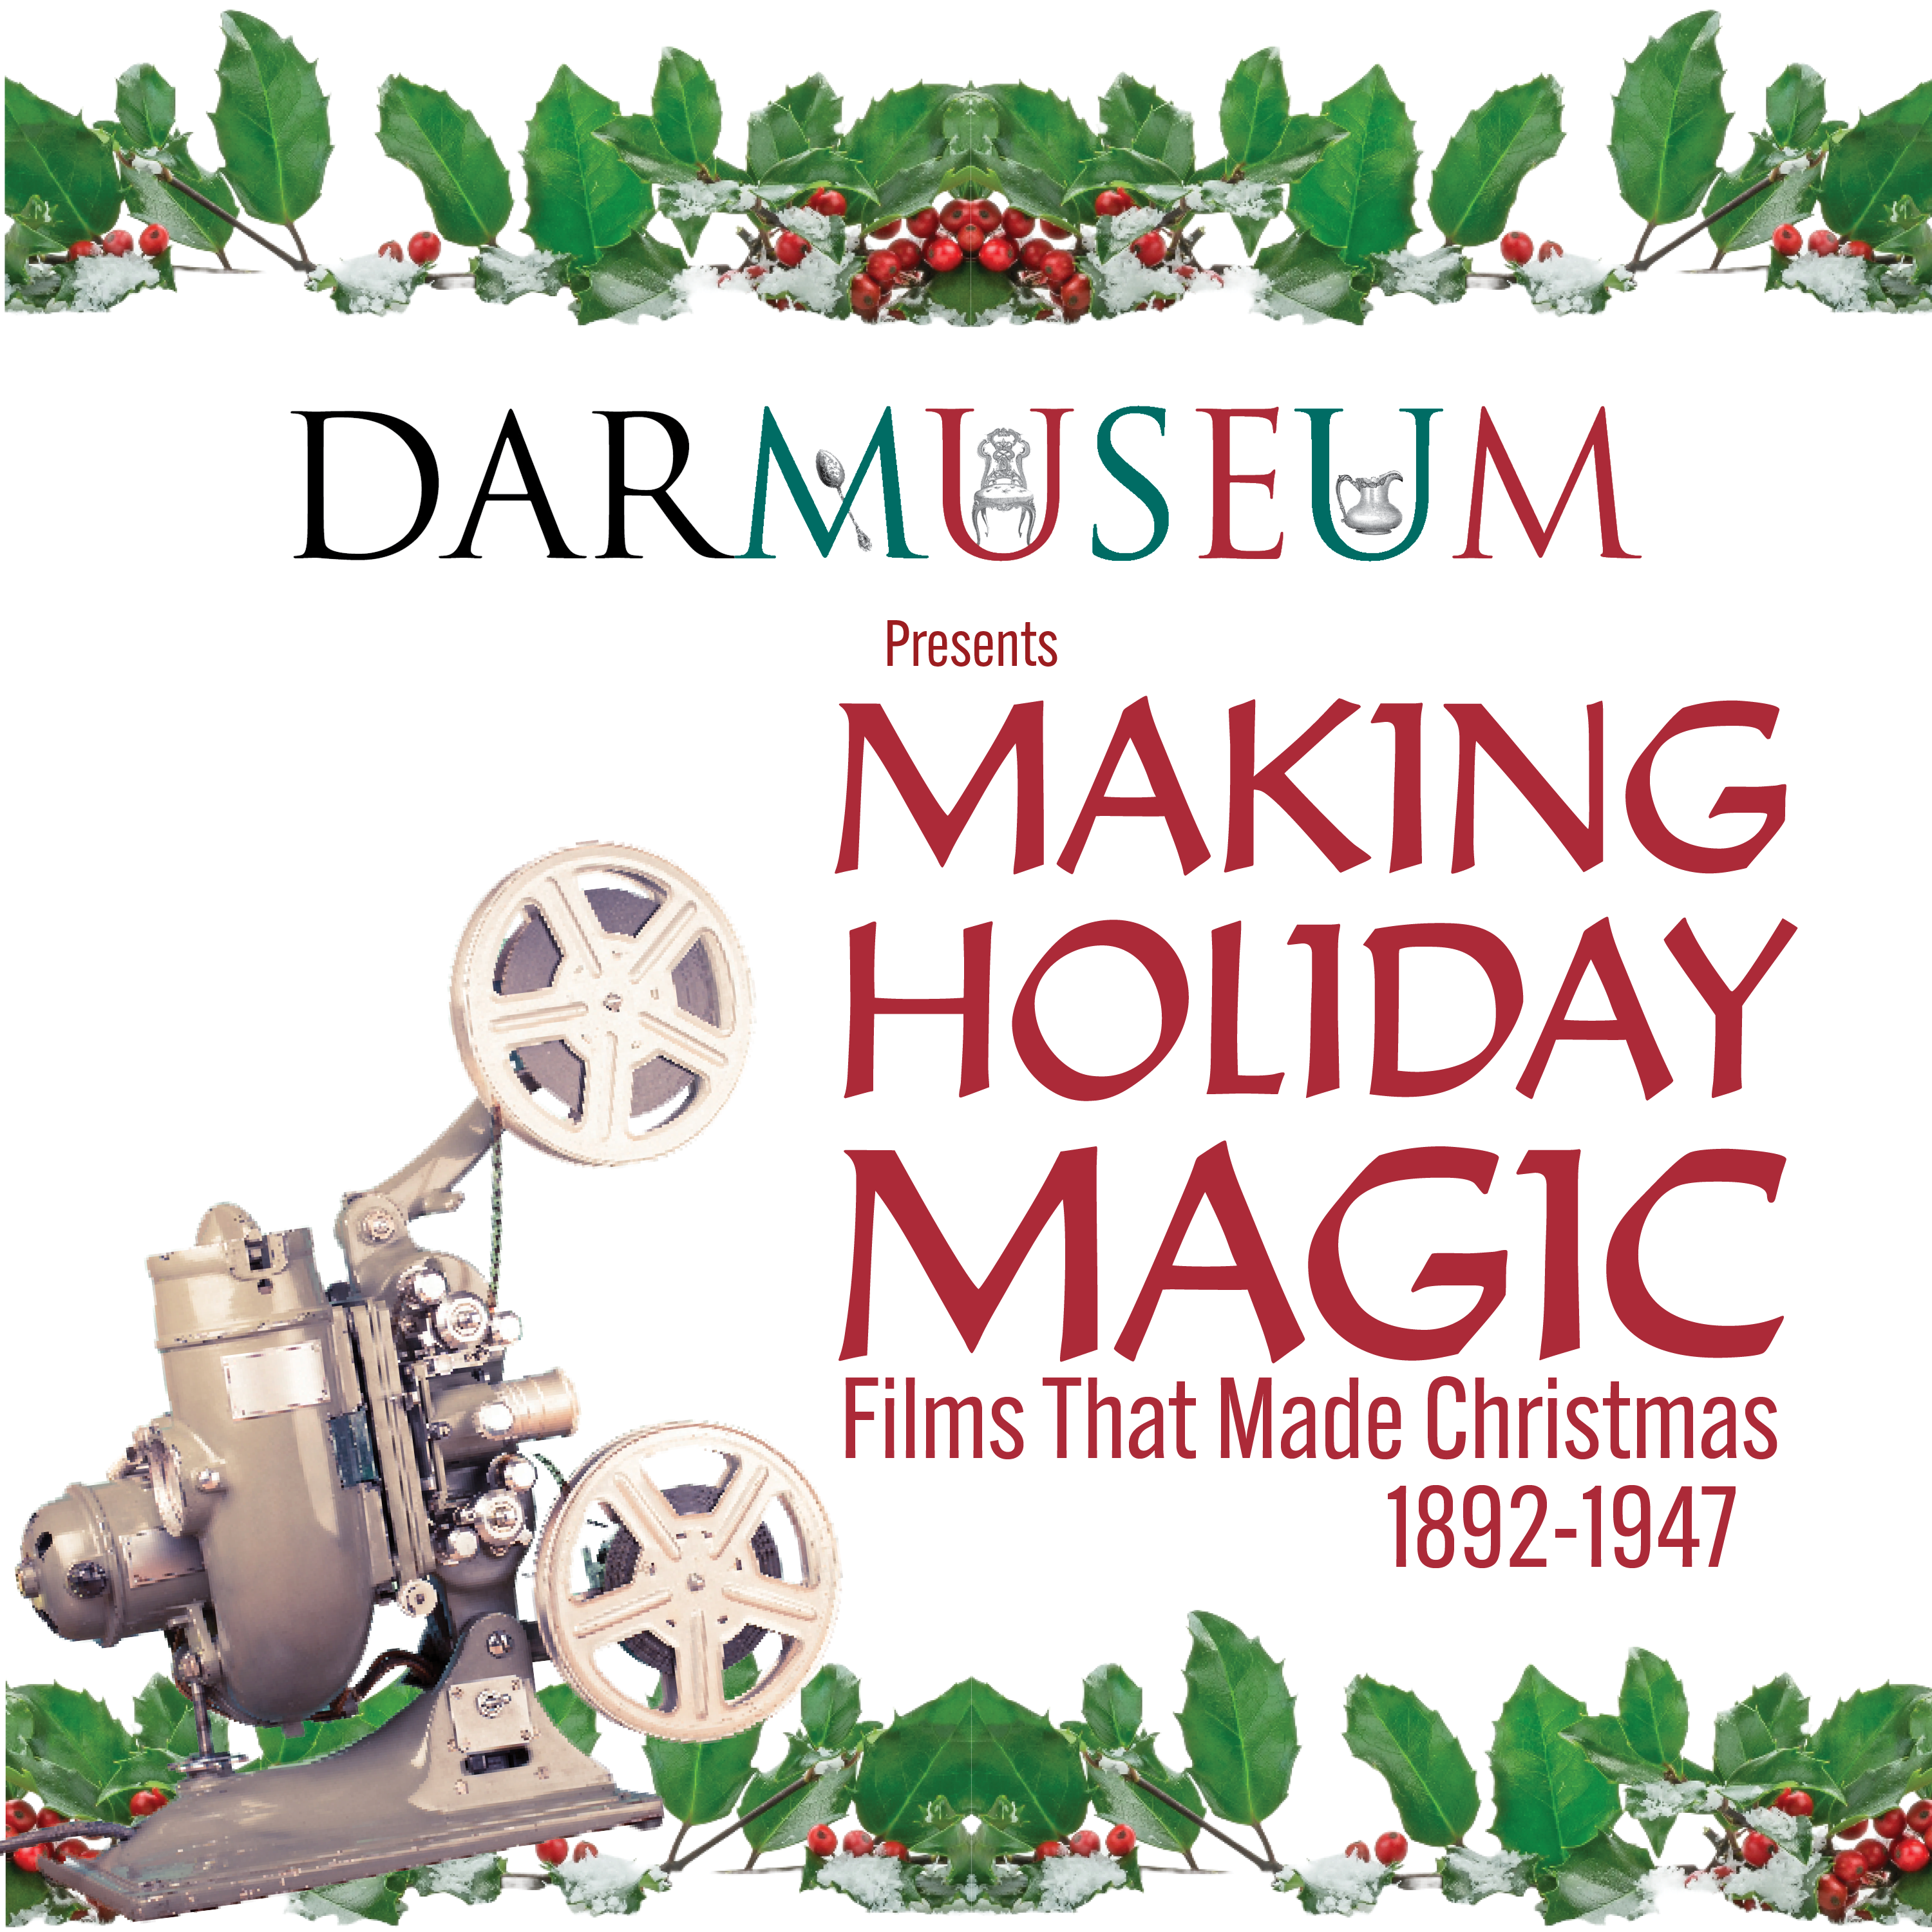 Holiday graphic that says DAR Museum presents making holiday magic films that made Christmas 1892-1947.